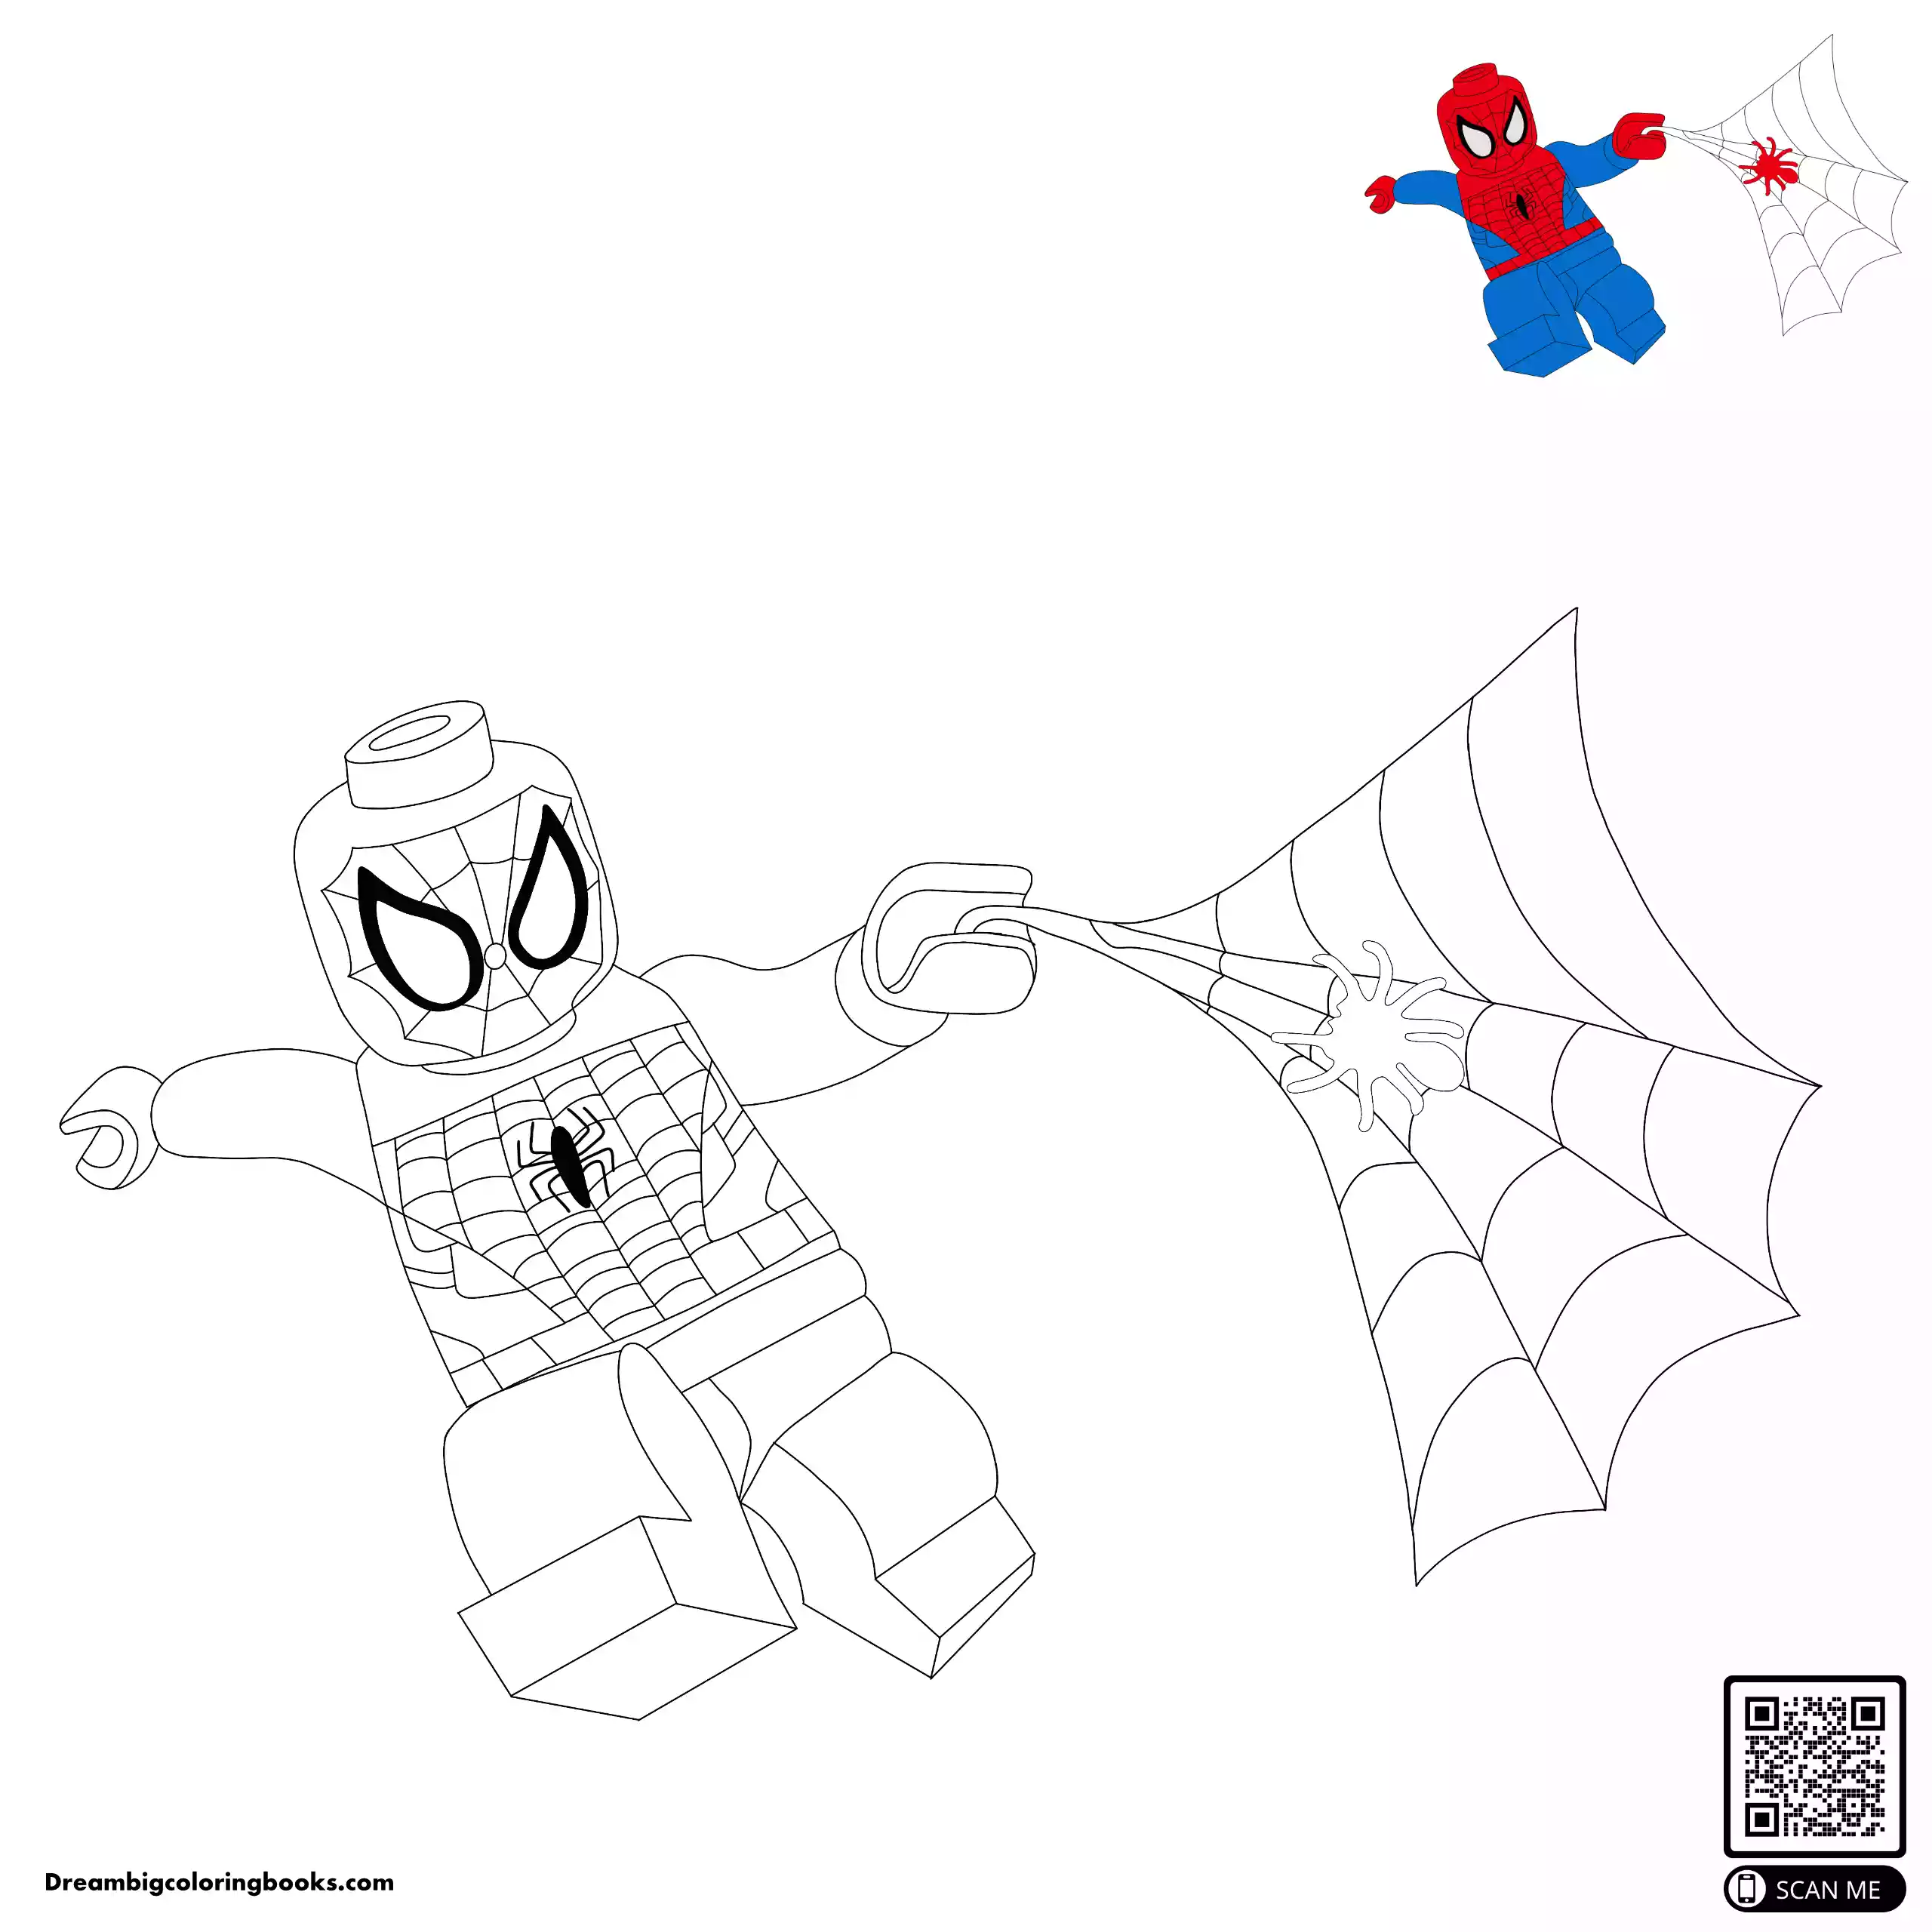 Lego Spiderman coloring sheets